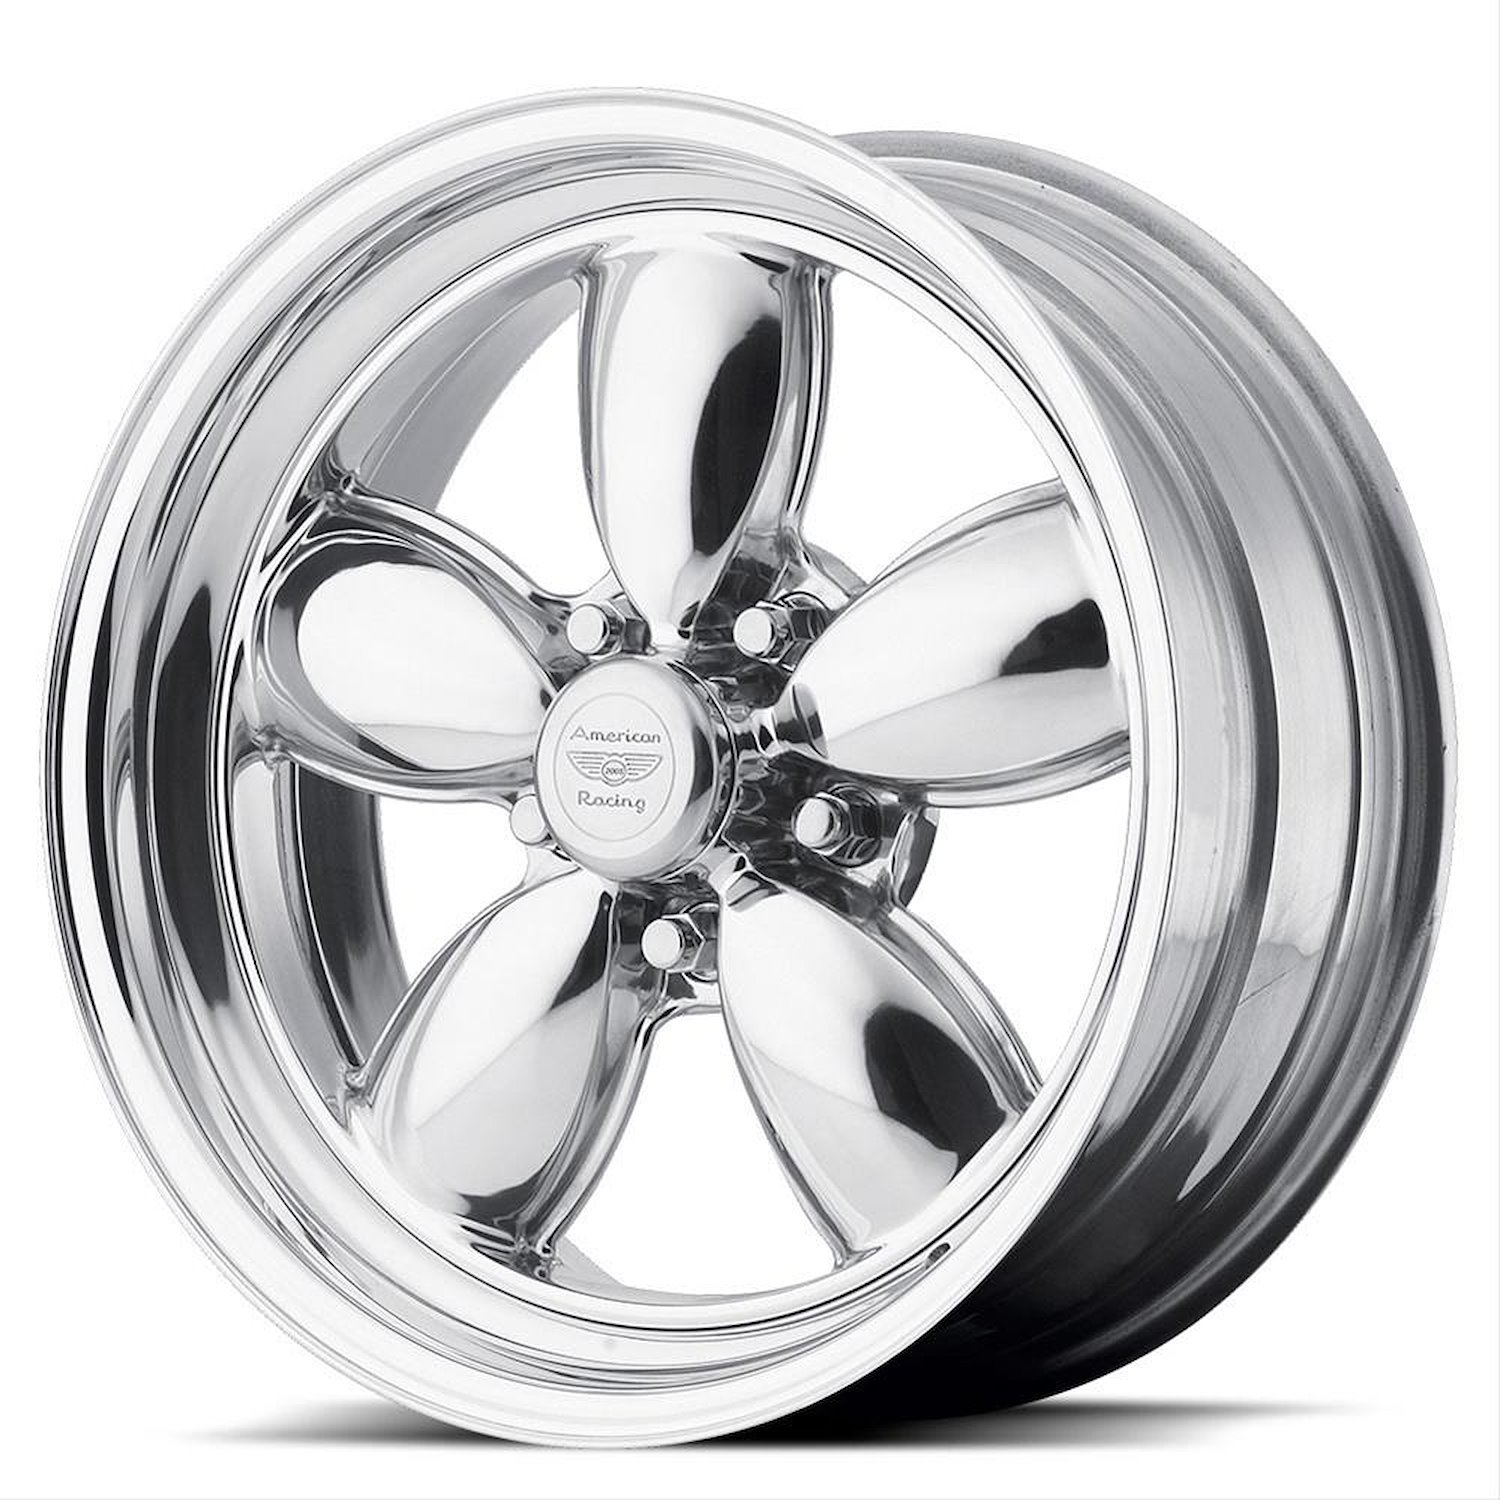 AMERICAN RACING CLASSIC 200S TWO-PIECE POLISHED 17 x 8 5X5.0 0 4.50